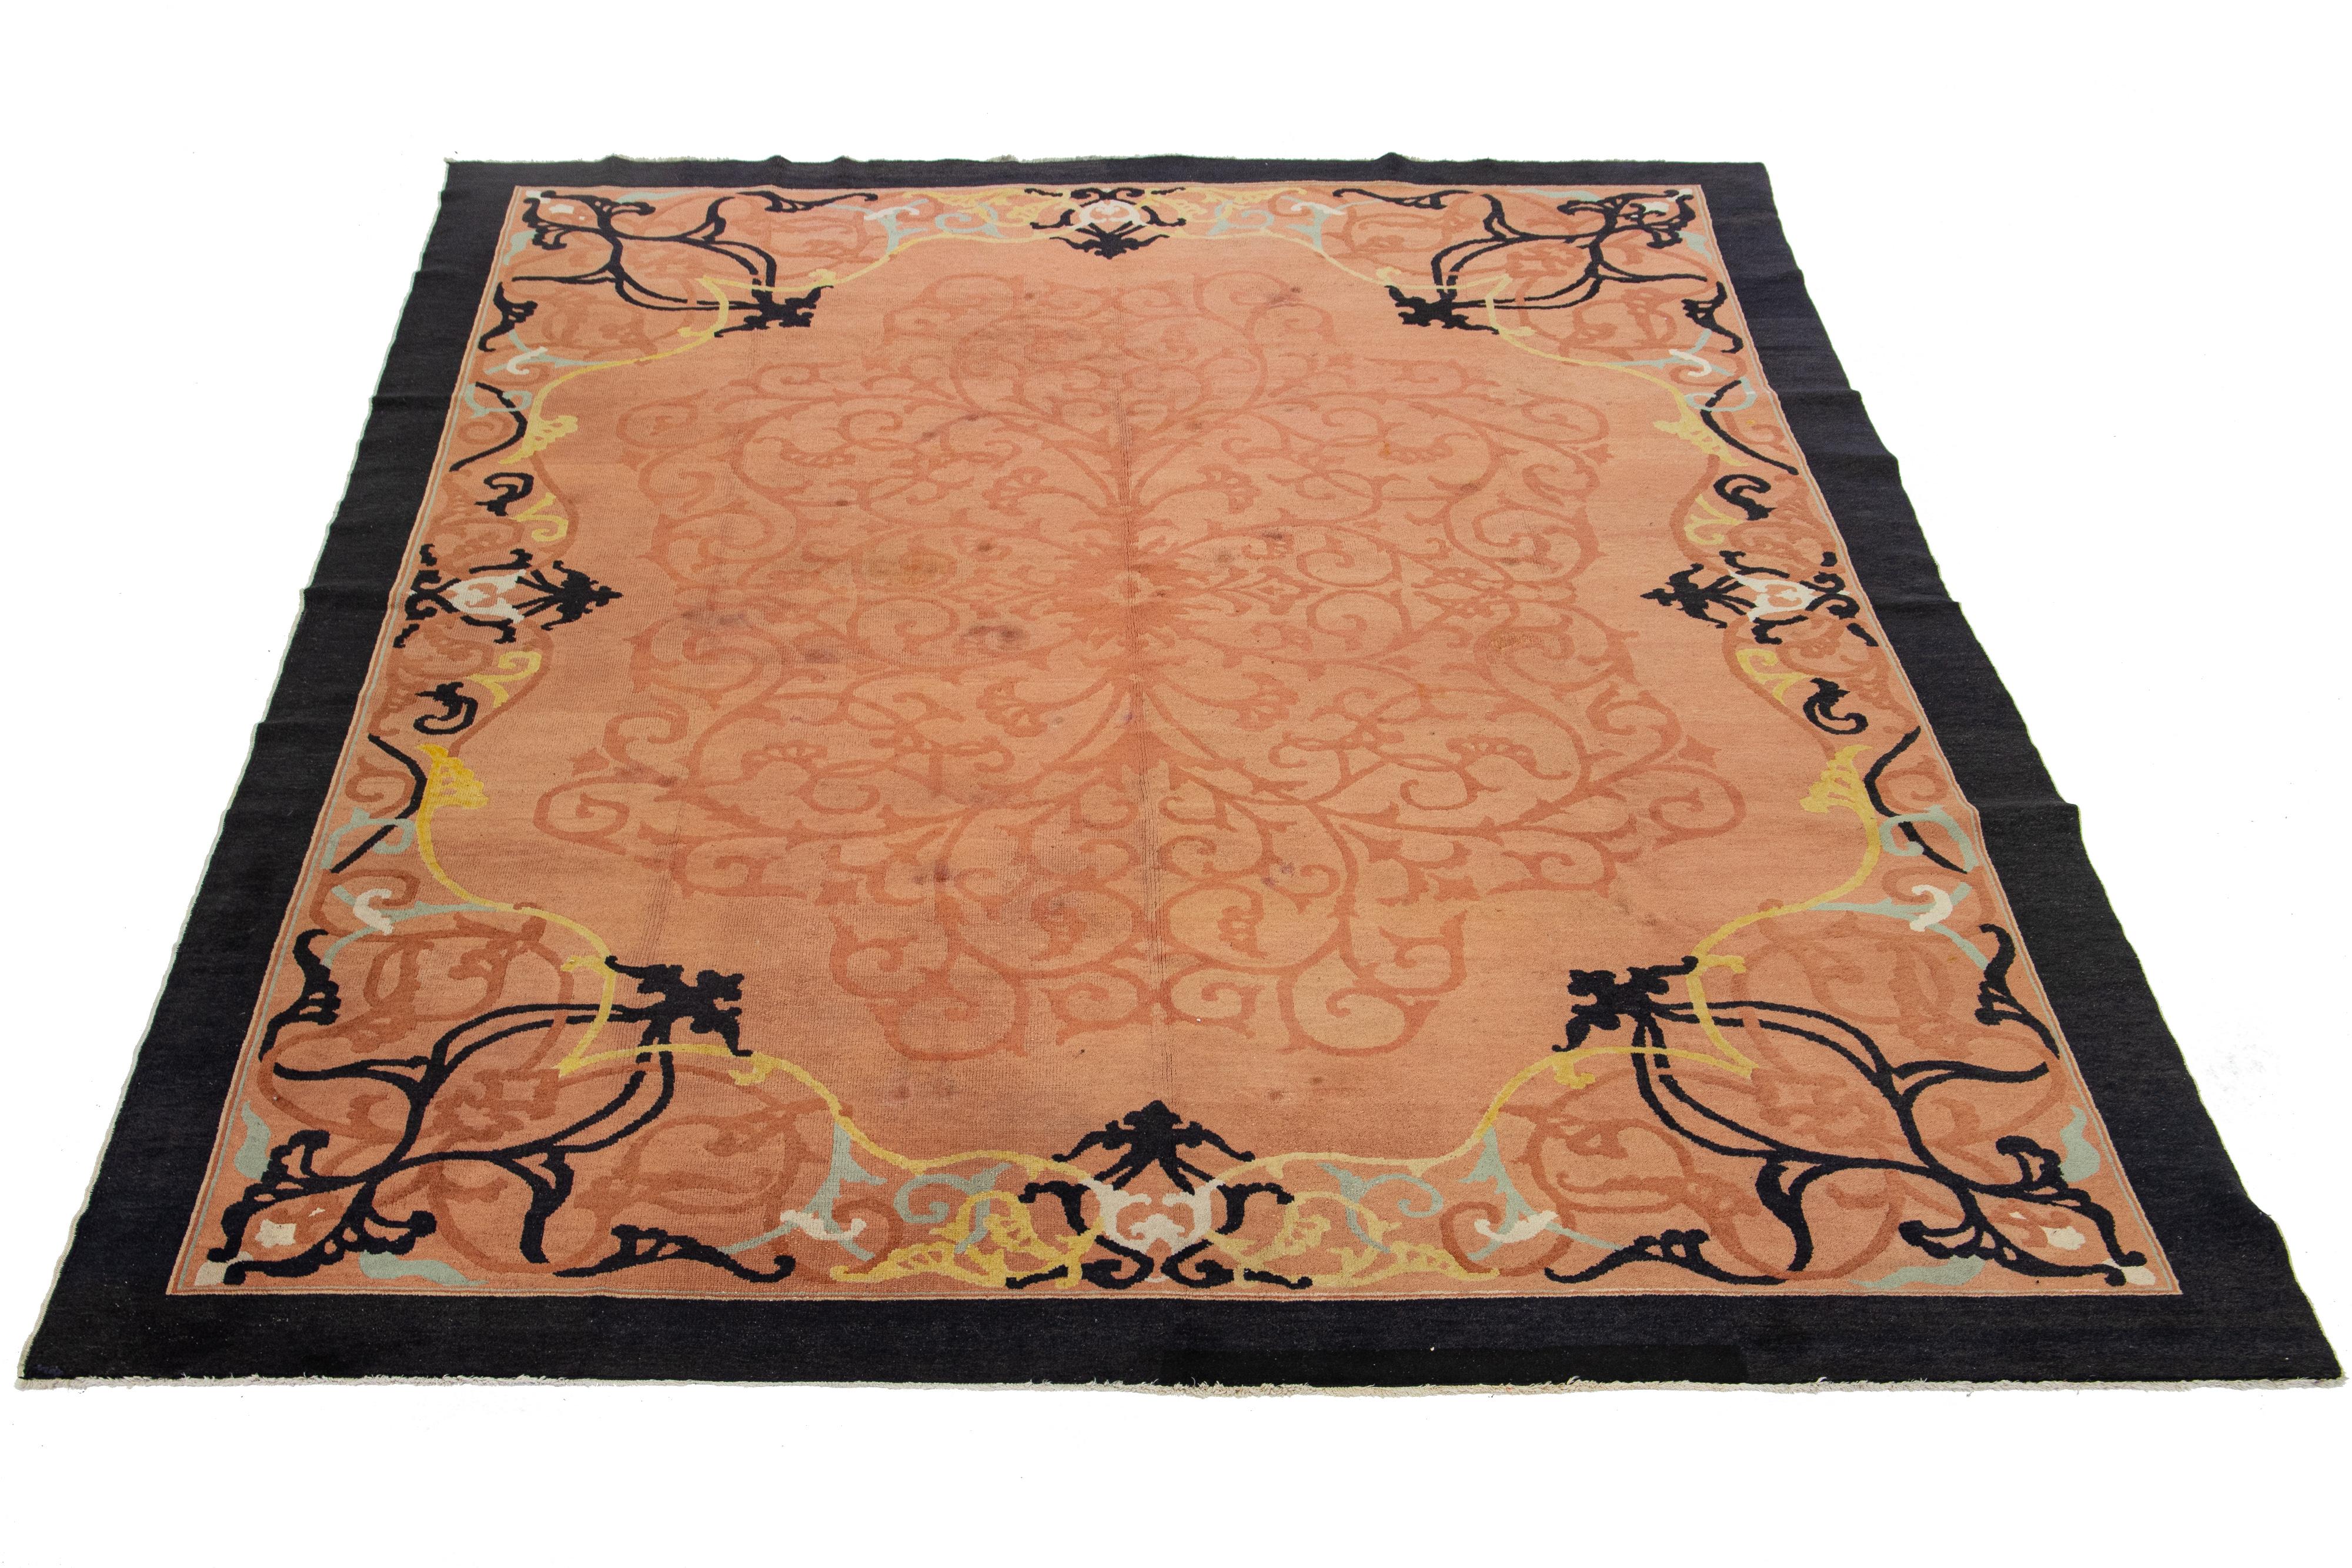 Antique 1920s Chinese Art Deco Rug In Terracota Color with Floral Scroll Pattern For Sale 4